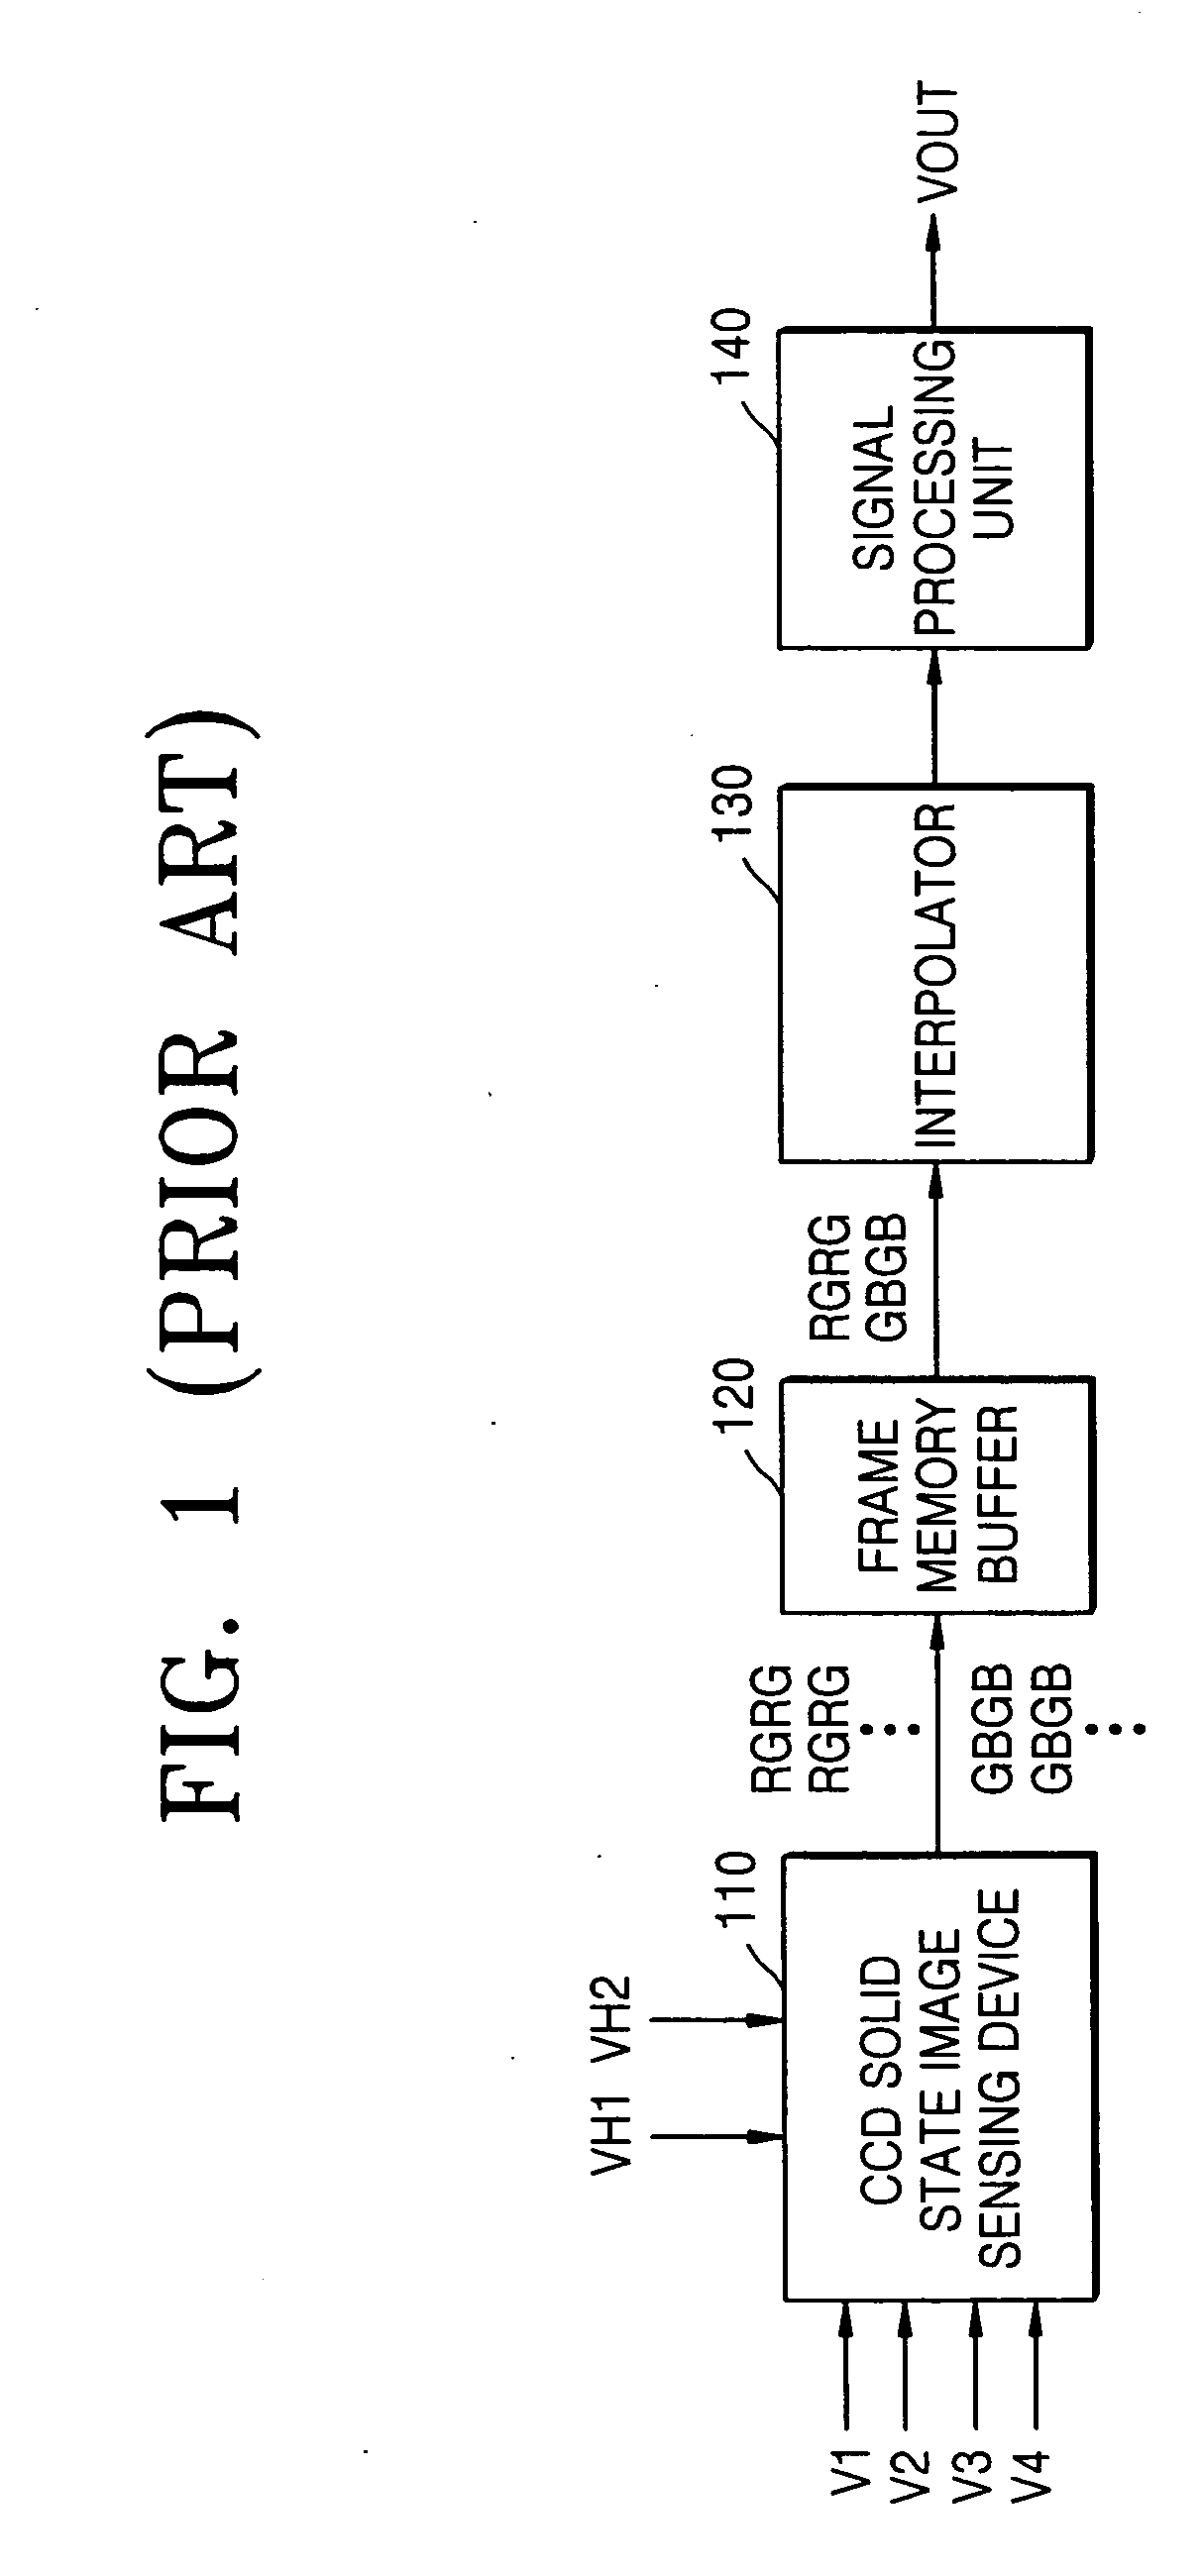 CCD imaging device and driving method for processing image data without frame memory buffer